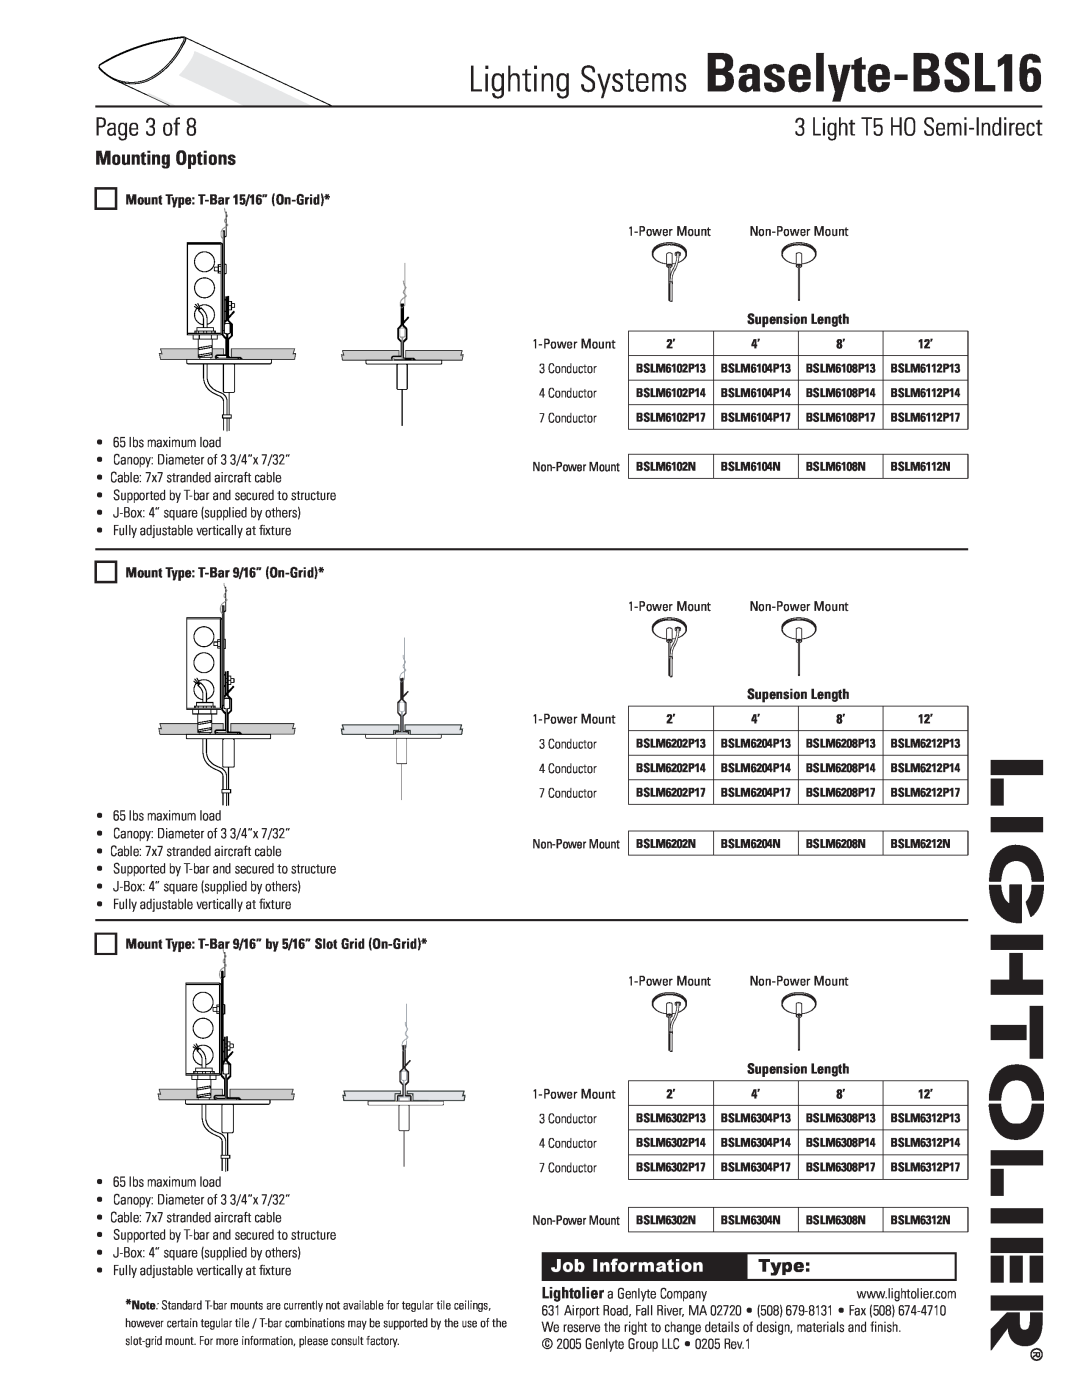 Lightolier Baselyte-BSL16 Mounting Options, Mount Type T-Bar15/16” On-Grid, Supension Length, Page of, Job Information 